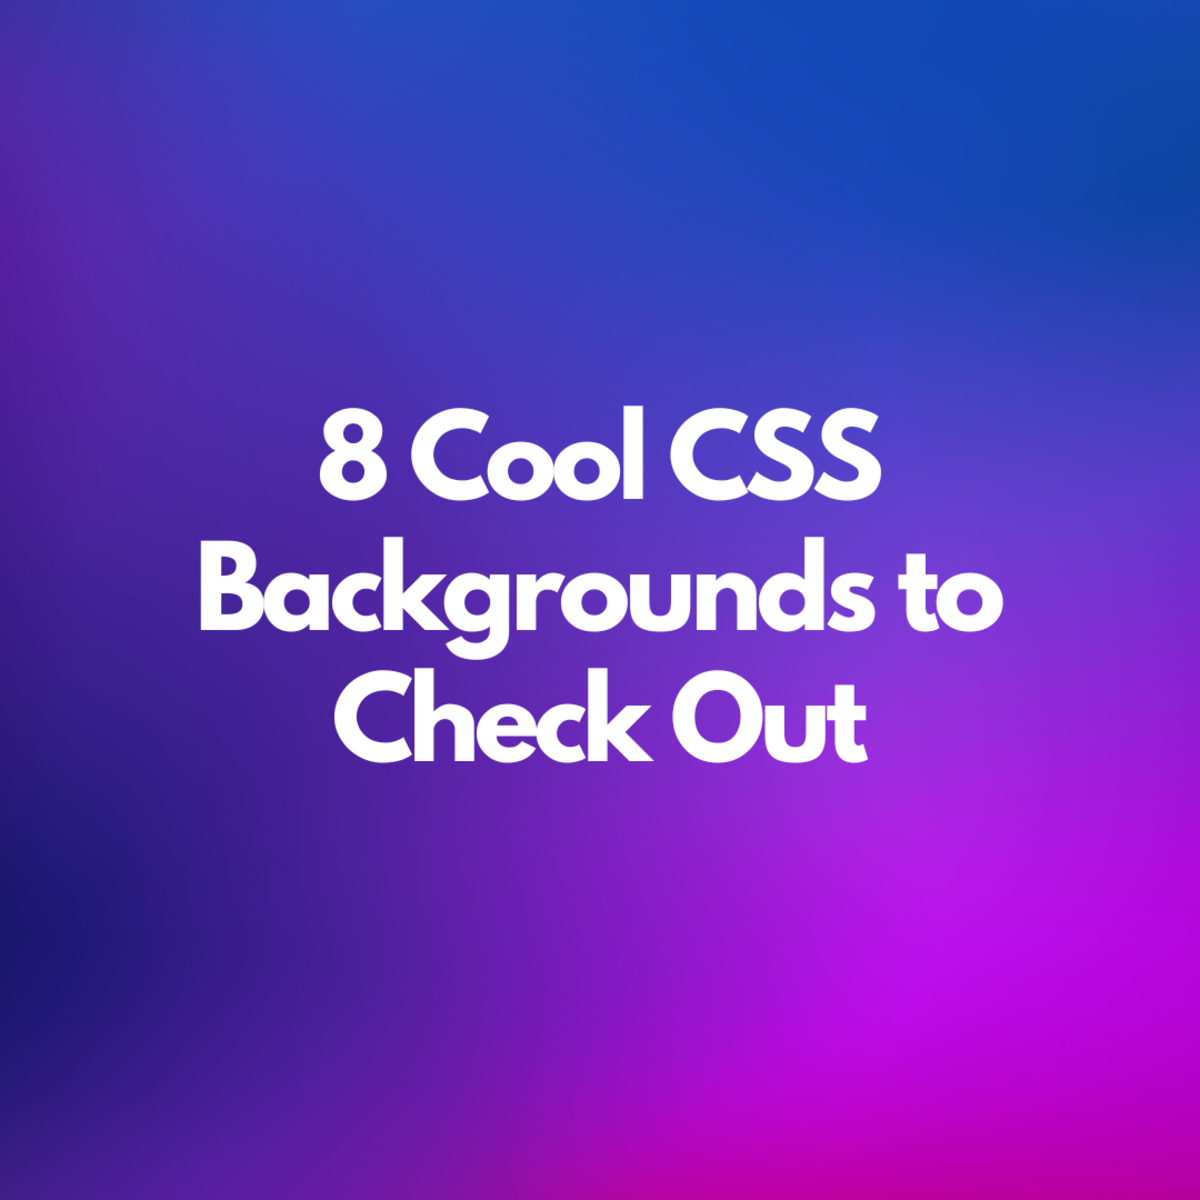 8 Cool CSS Backgrounds That Look Amazing: The Ultimate List